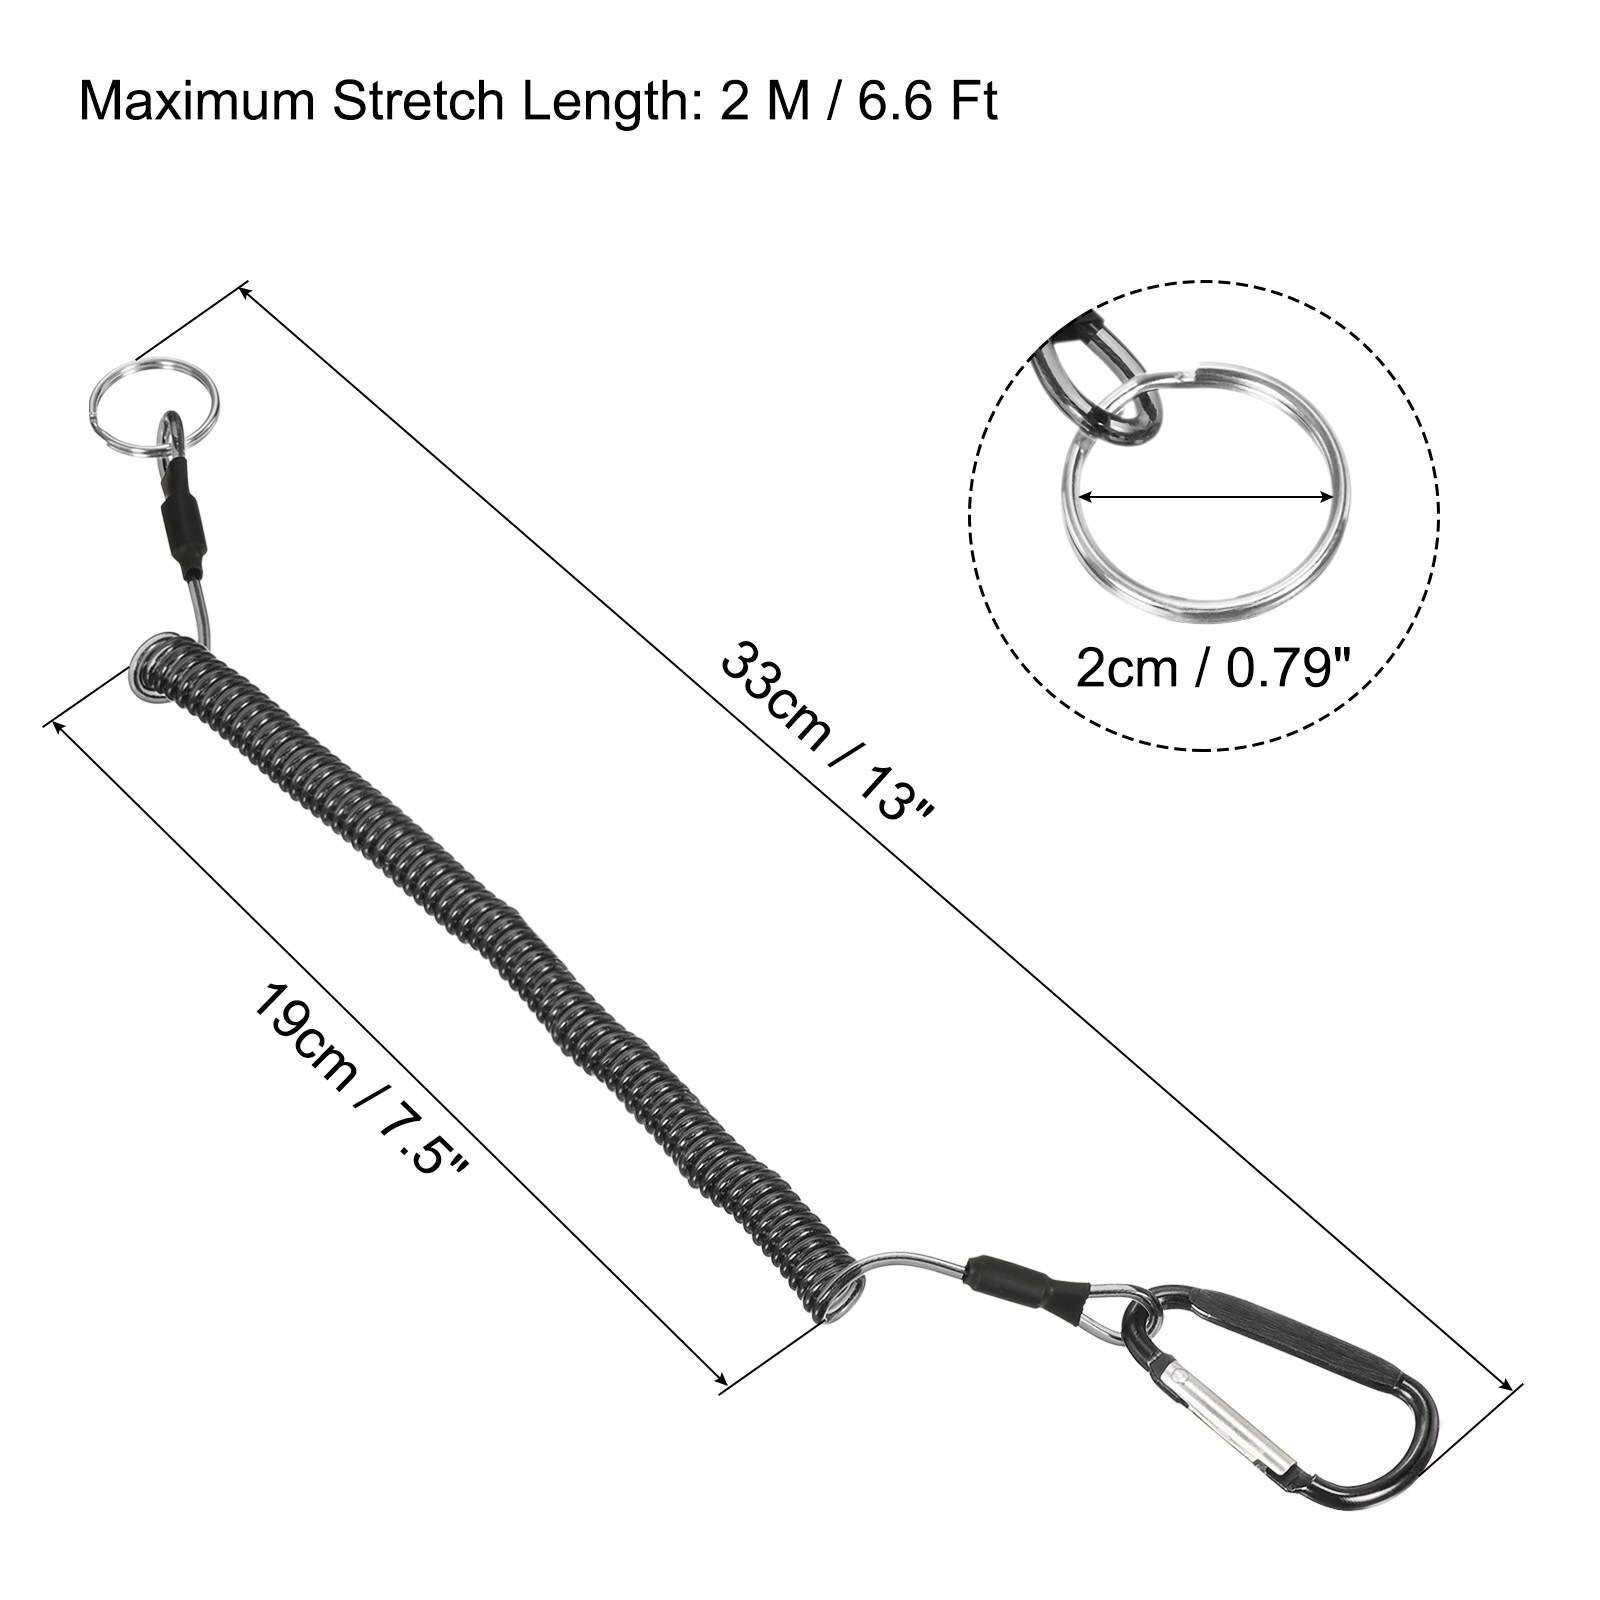 https://ak1.ostkcdn.com/images/products/is/images/direct/3a29d531ef0b58d6f72fdc2b897b85a5aae65be5/Fishing-Tools-Lanyard%2C-Safety-Cord-Spiral-Lanyard-Tether-Retractable-w.jpg